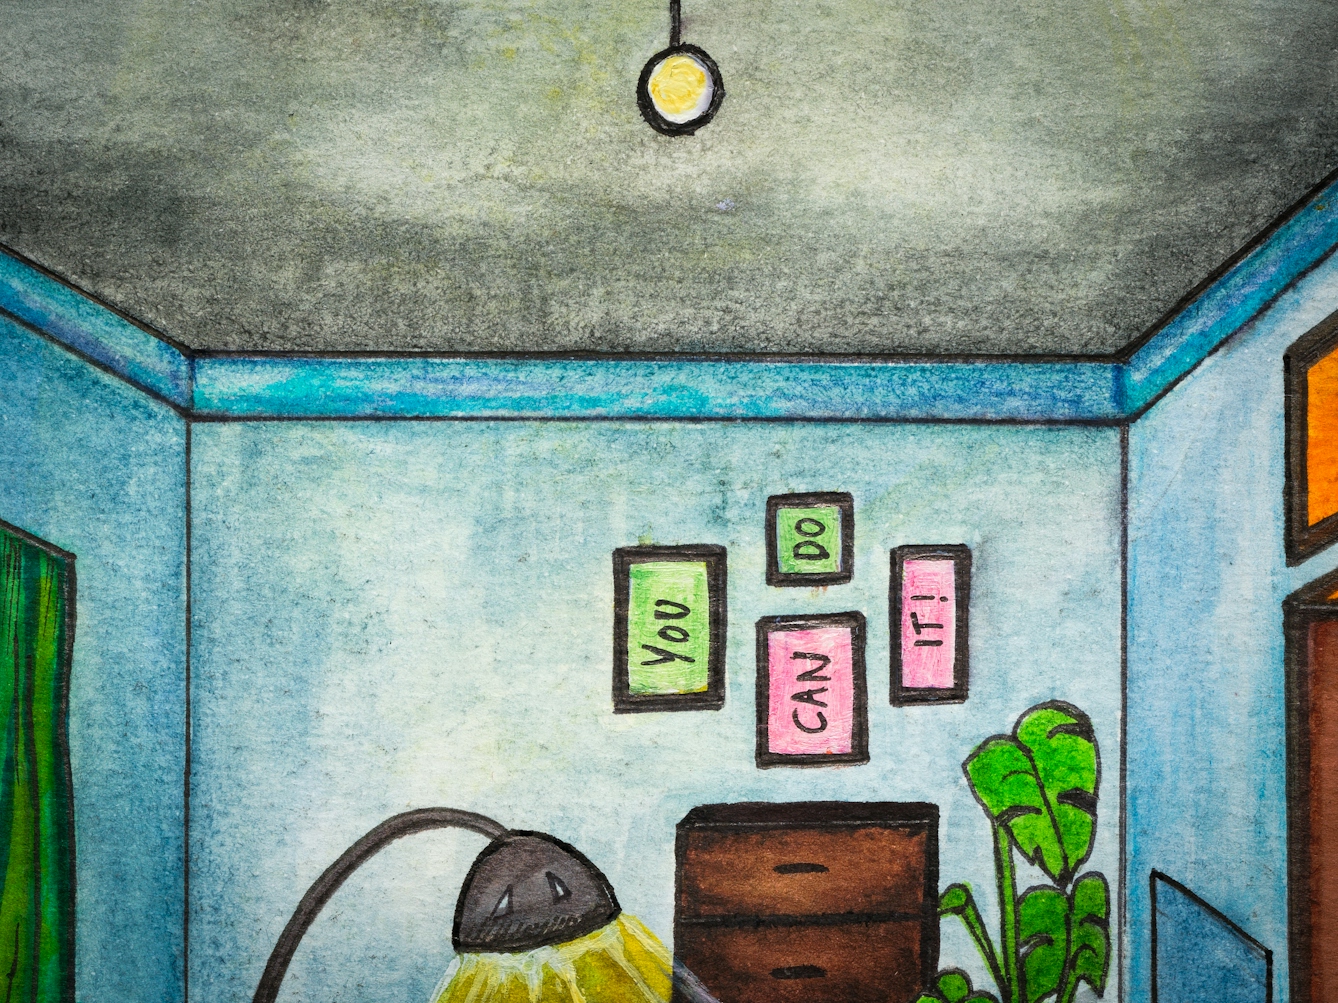 Detail from larger colourful artwork made with paint and ink on textured watercolour paper. The artwork shows a scene in a bedroom with predominantly hues of blues, greens and yellows. At the back of the room is a chest of drawers above which hangs 4 picture frames, one word in each, spelling out the phrase, 'you can do it!'.